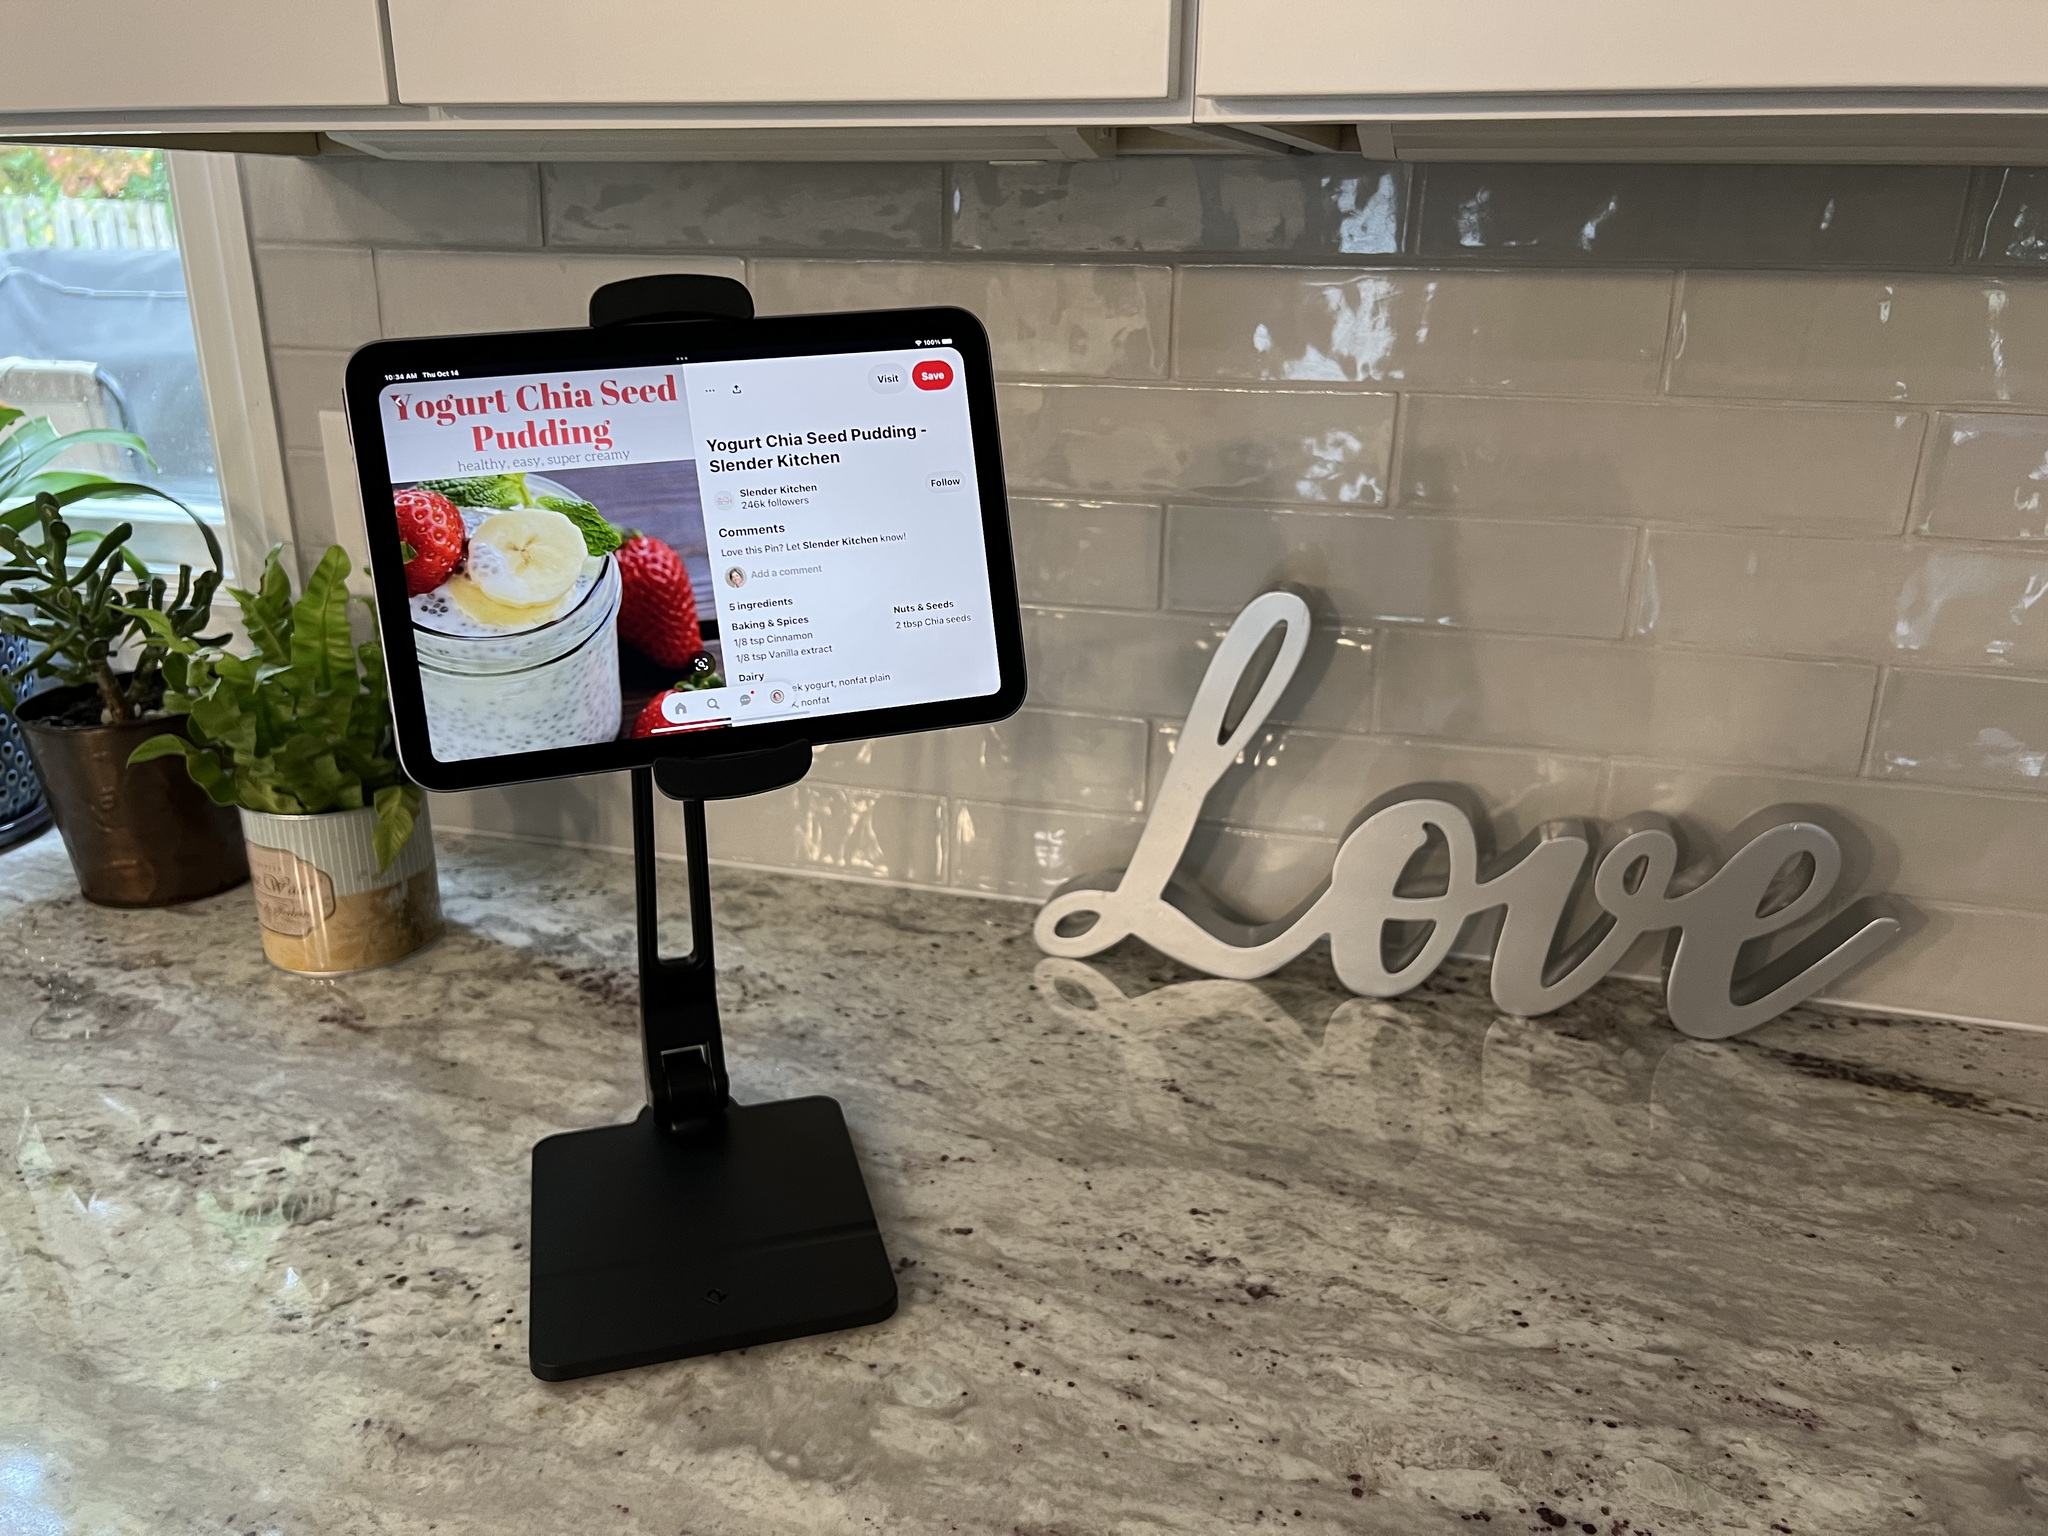 Twelve South Hoverbar Duo Lifestyle Cooking Recipe on Ipad Mini